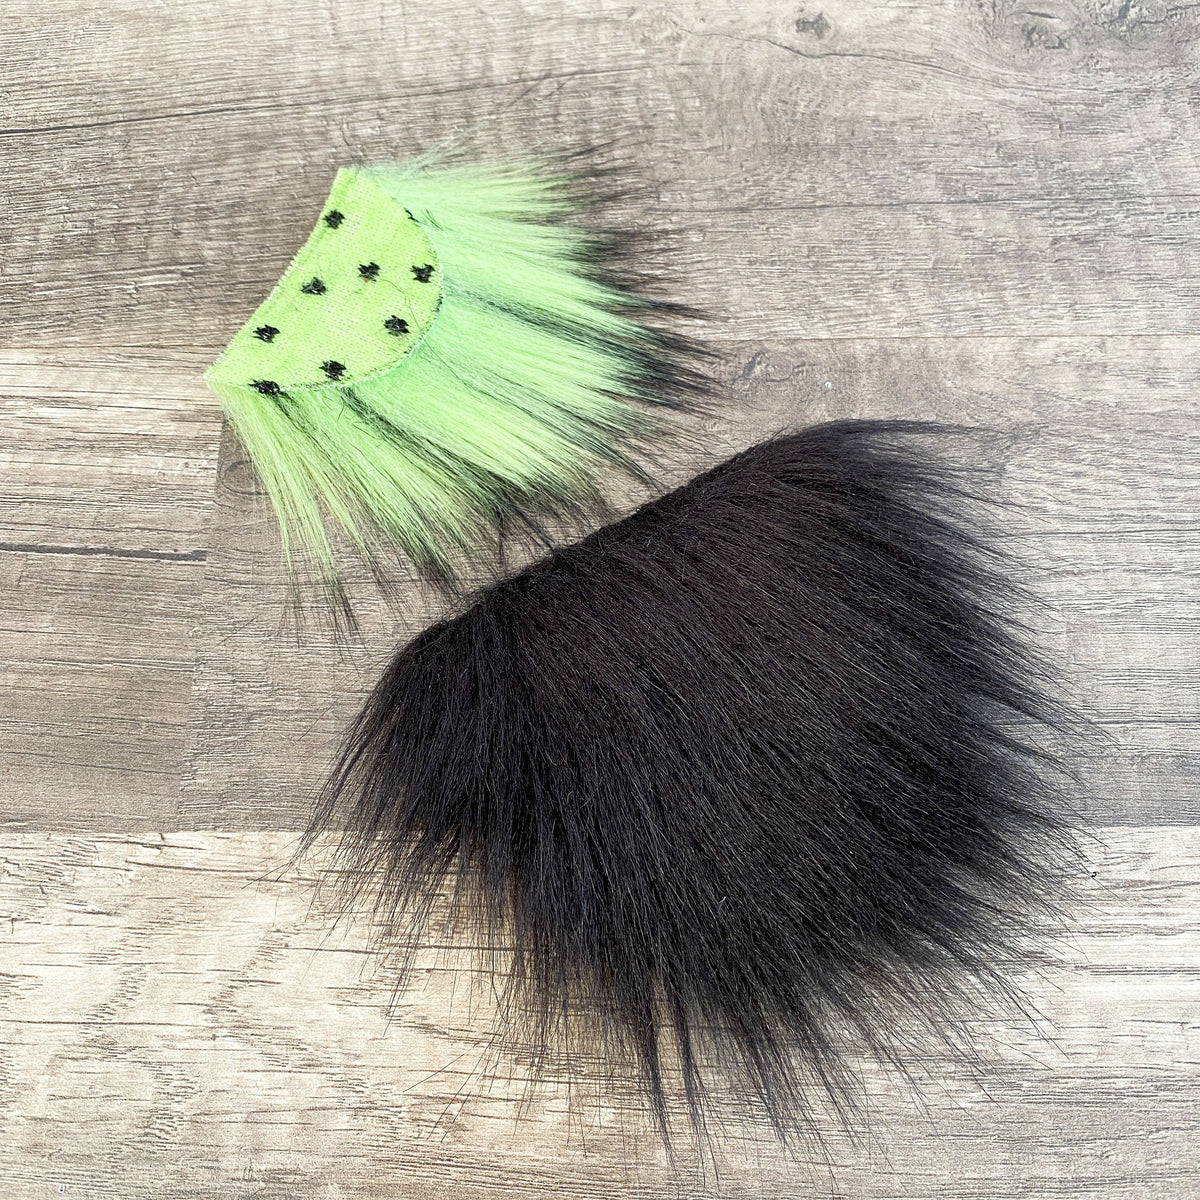 Two Piece Layered Gnome Beard - Black-Tipped Green Over Straight Black